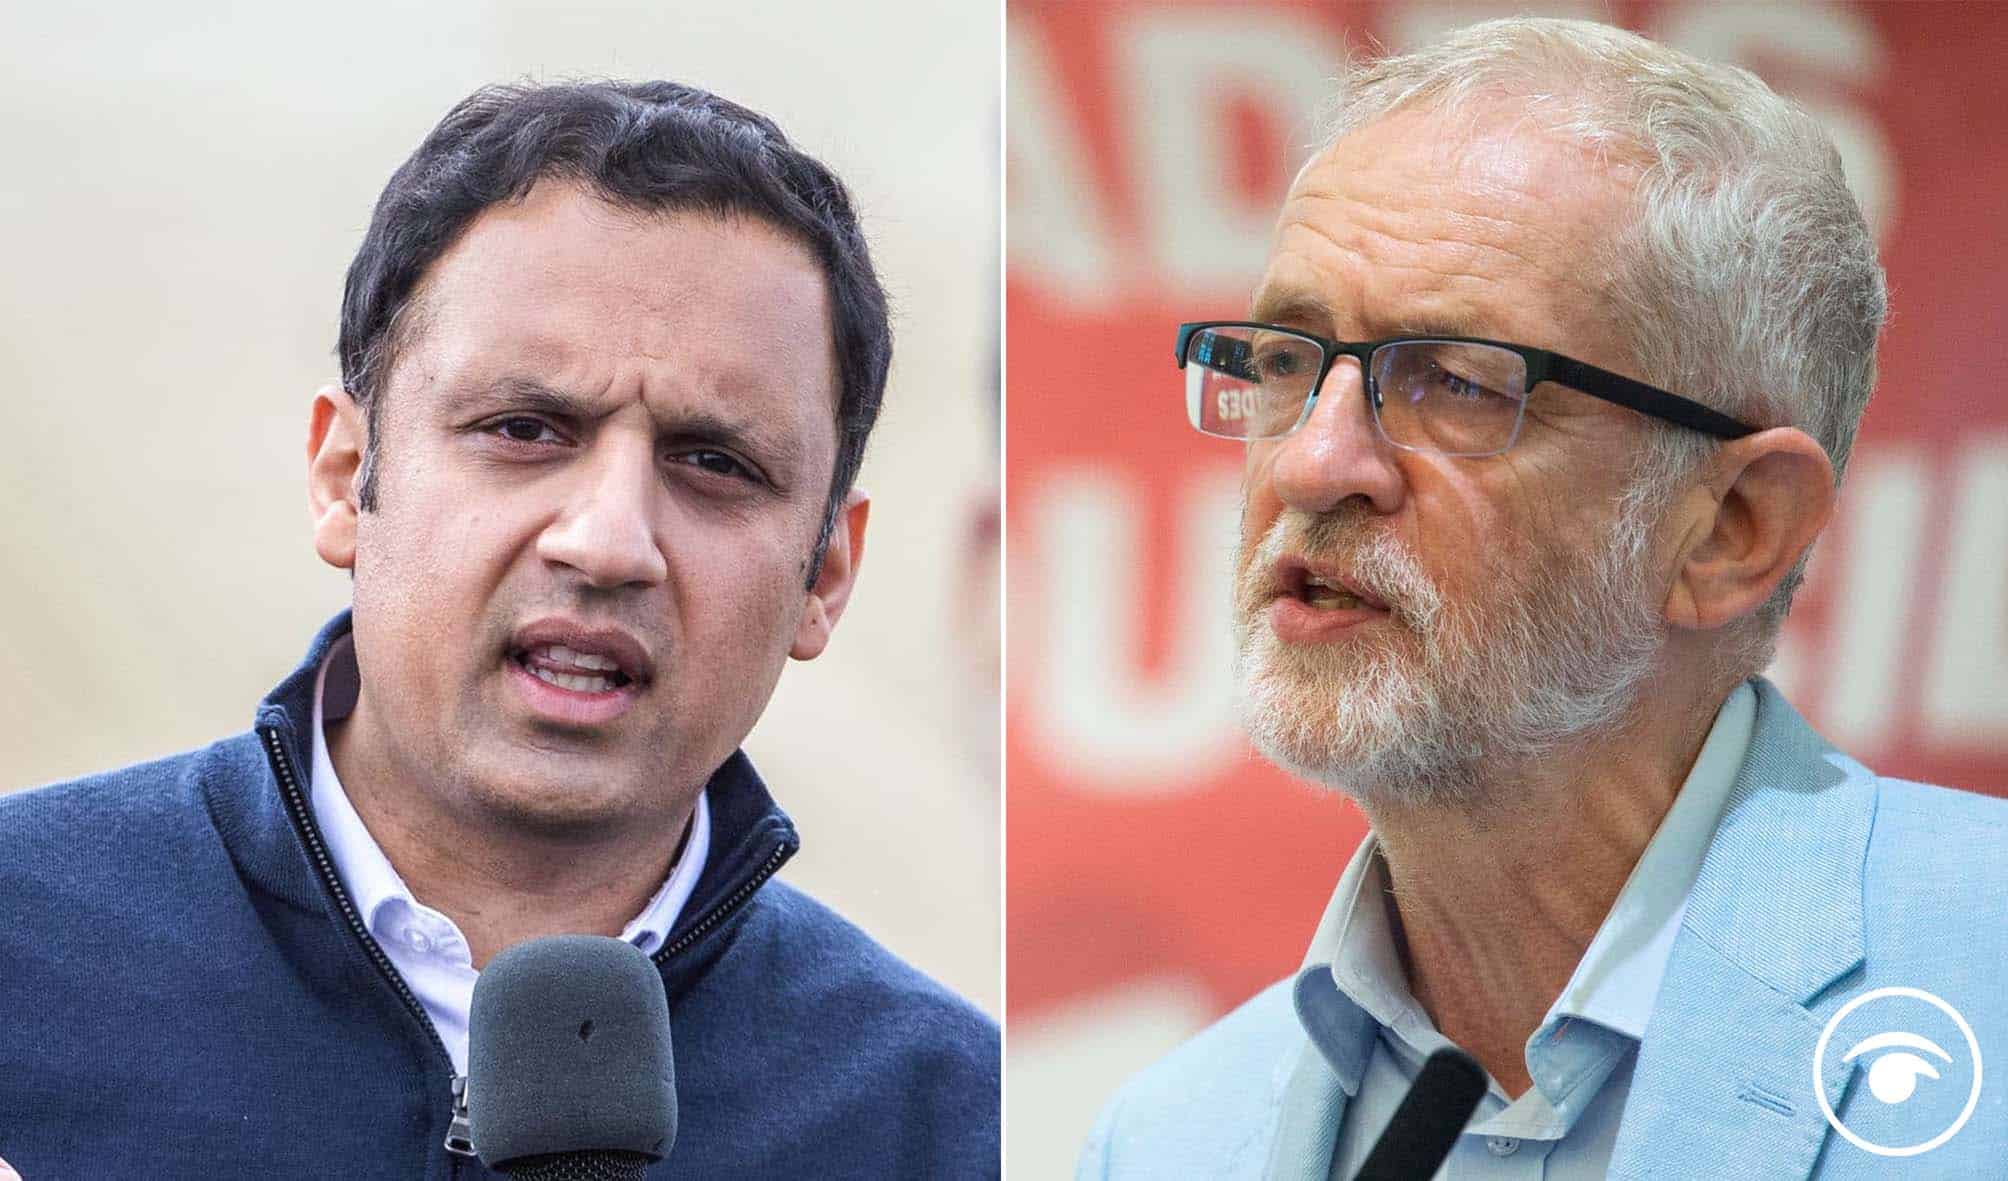 Sarwar calls on Corbyn to apologise to Jewish community as one MSPs calls for whip to be restored